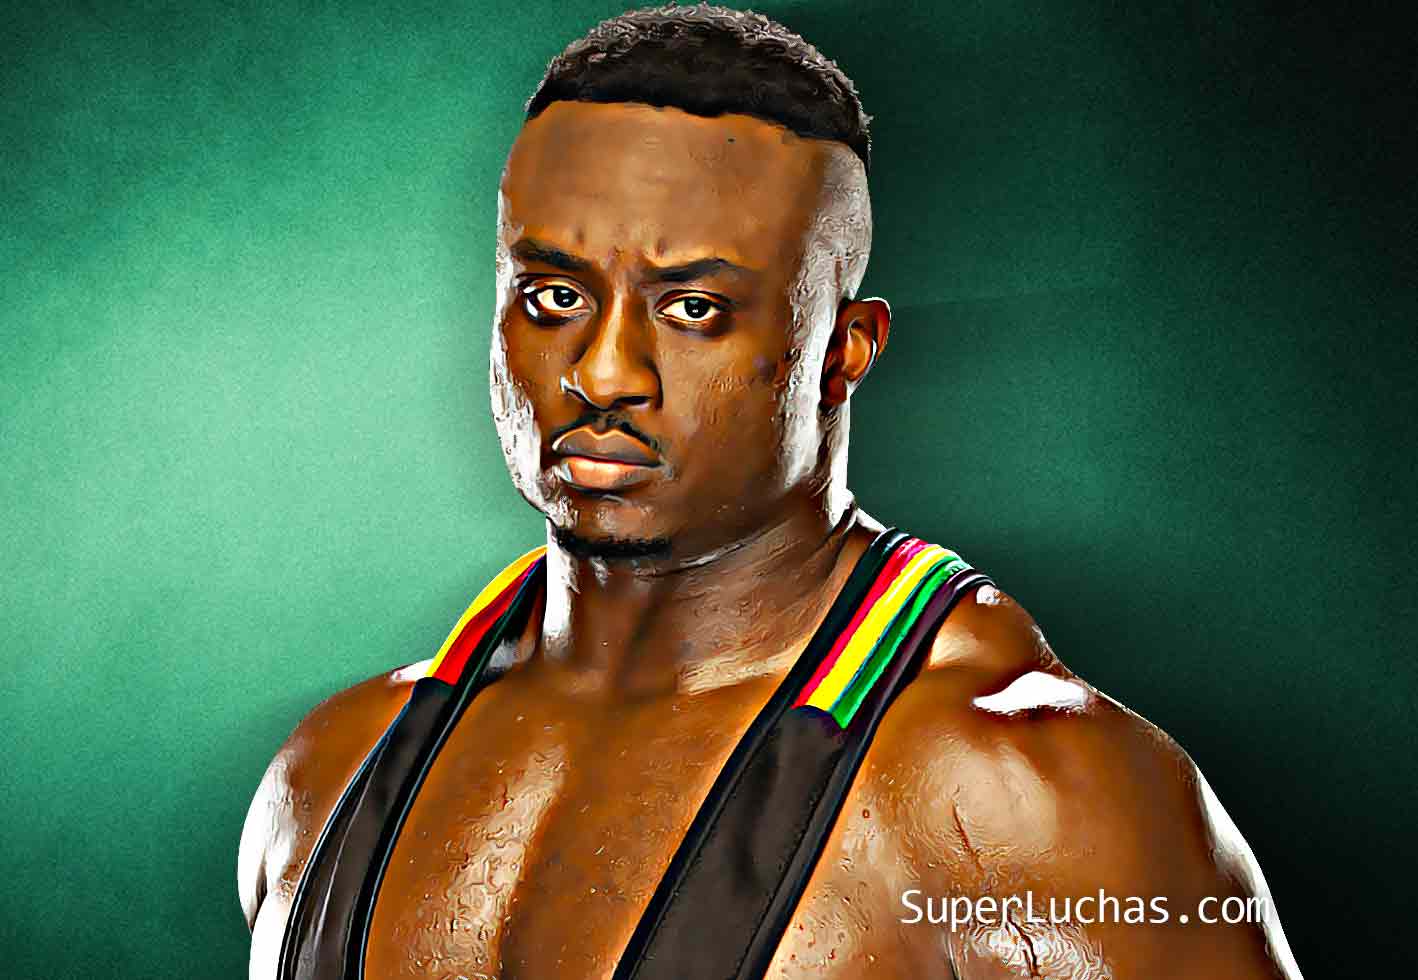 Who was the fake Big E that appeared on SmackDown Live?